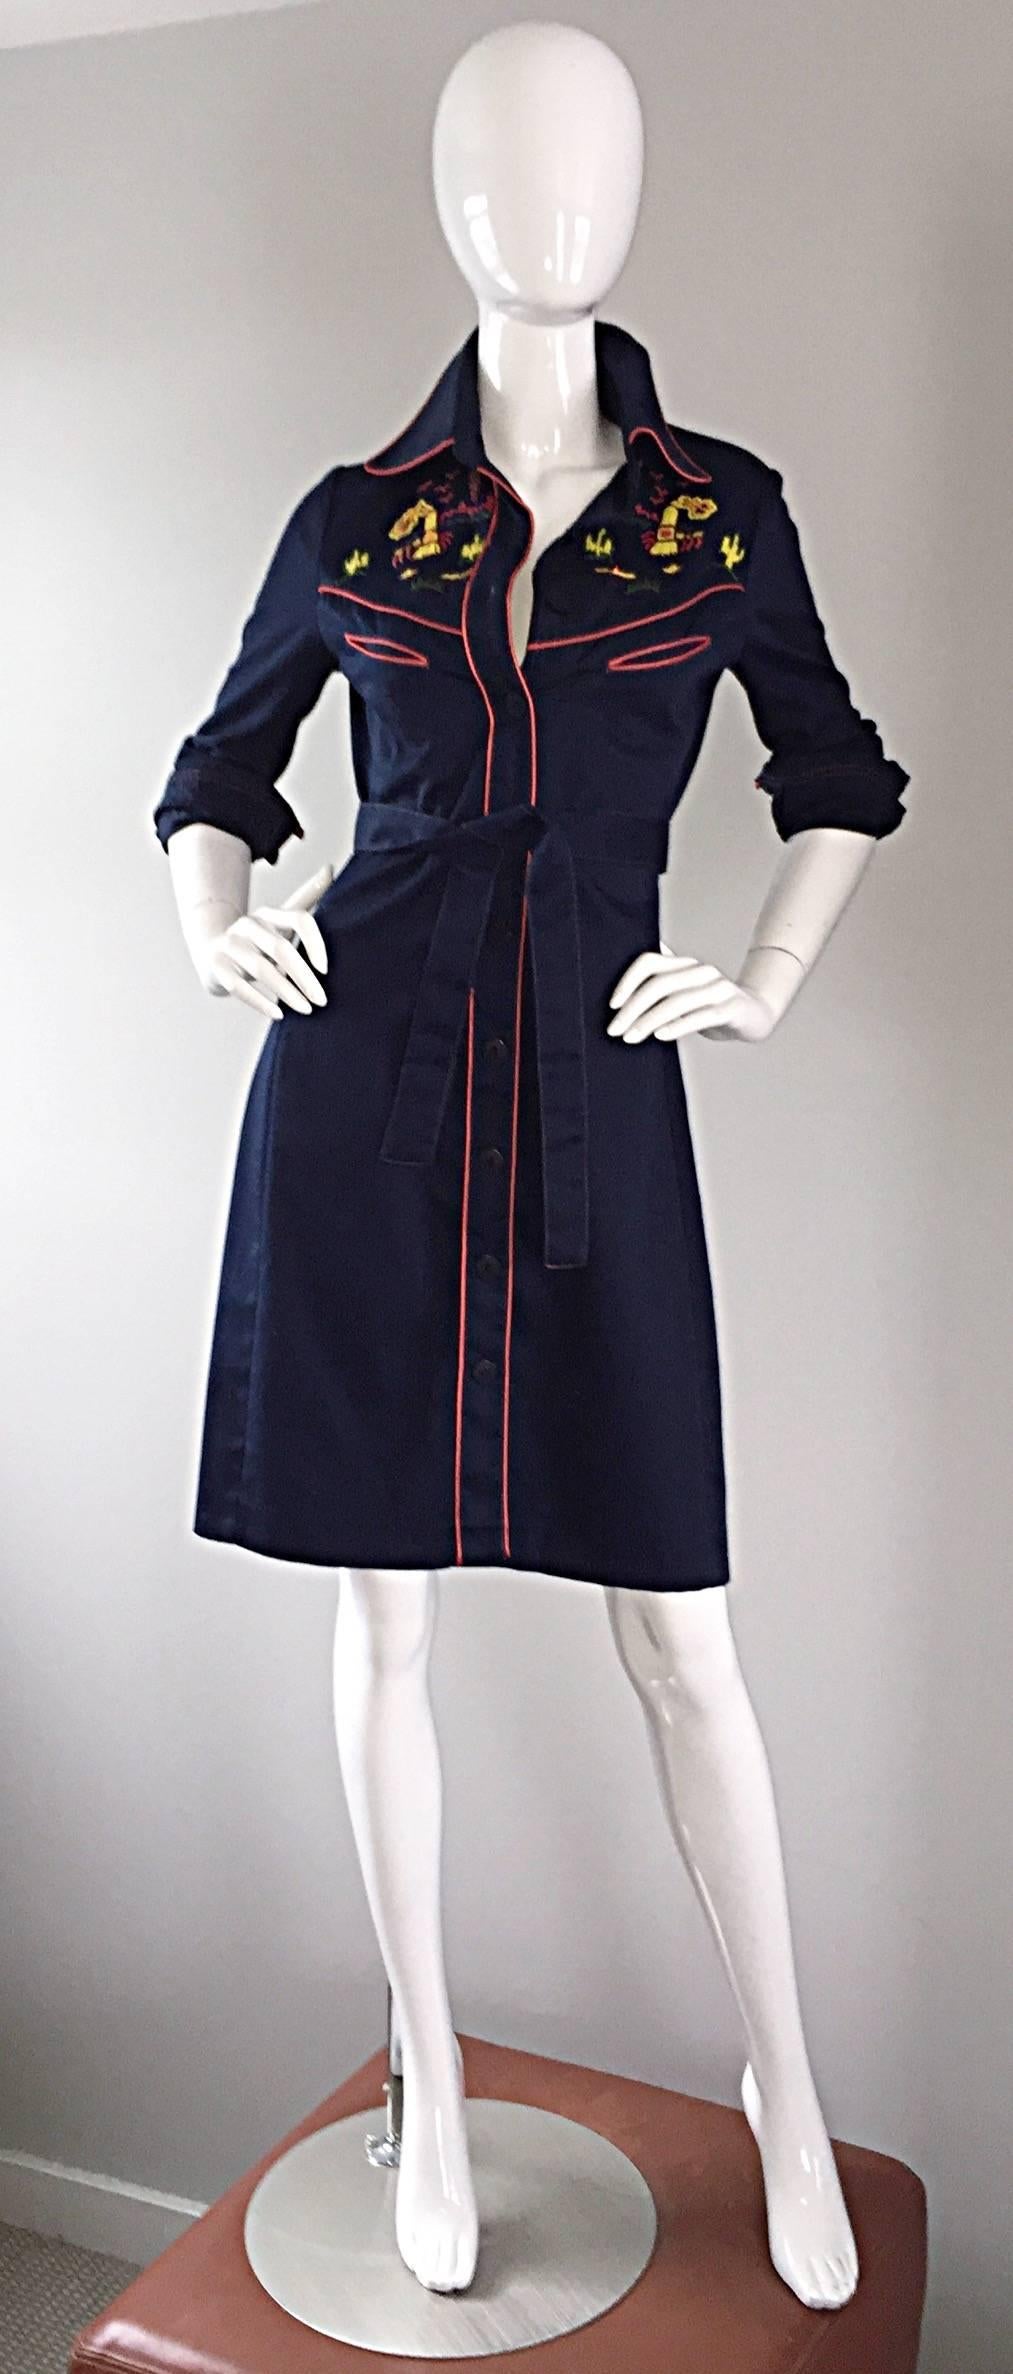 Amazing rare 70s ARISTO KAT beaded 'El Paso' cotton western shirt dress! Navy blue, with red piping at edges. Hand beaded bodice and back. Detachable wrap belt. Features mock buttons up the bodice, with snap closures. Three functional buttons at